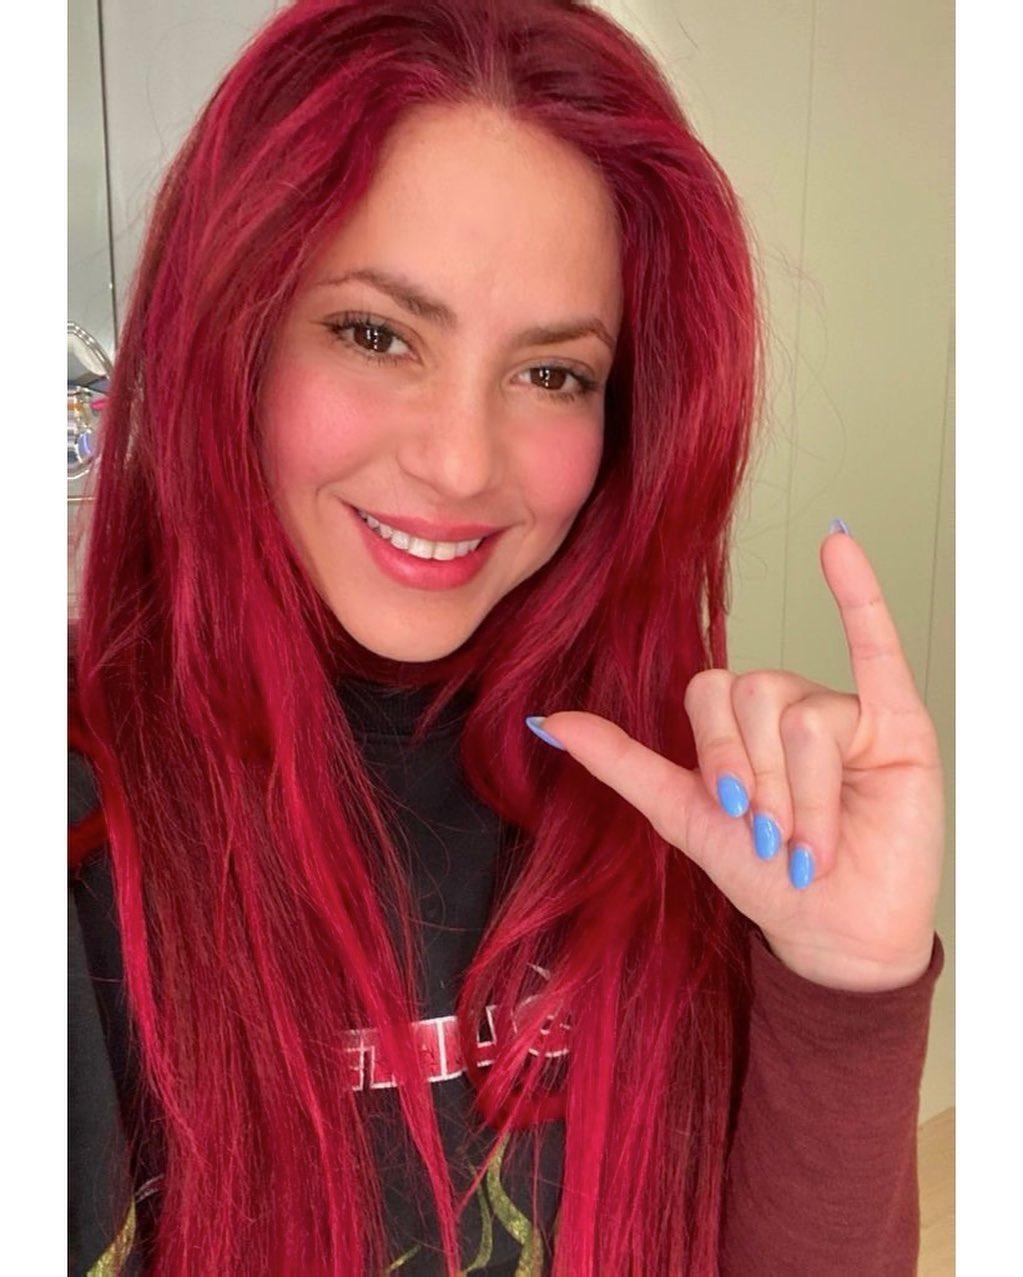 Shakira has long red hair and bright blue nails in a selfie.